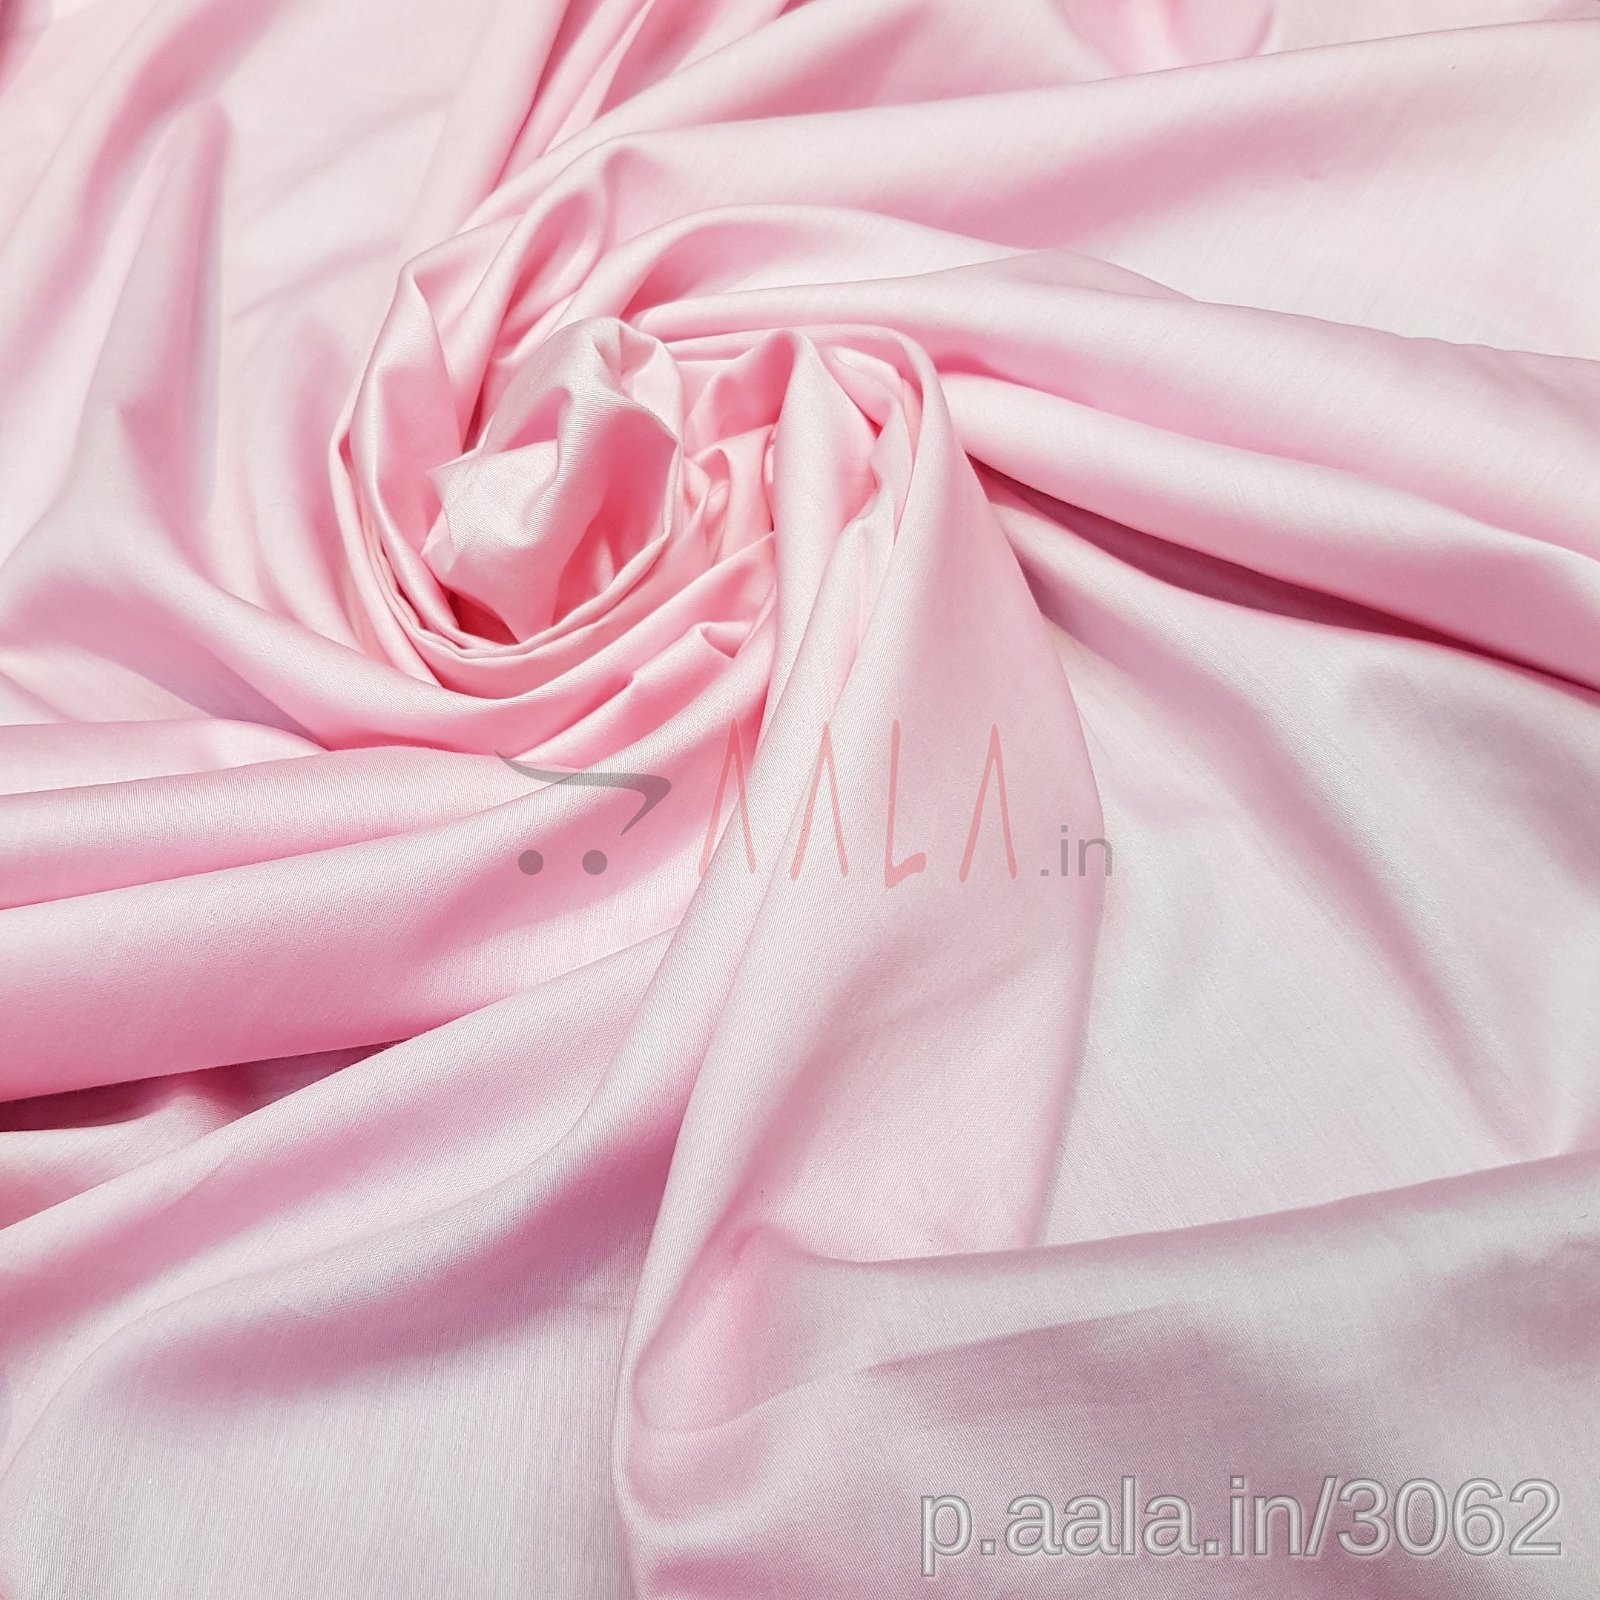 Satin Cotton 44 Inches Dyed Per Metre #3062